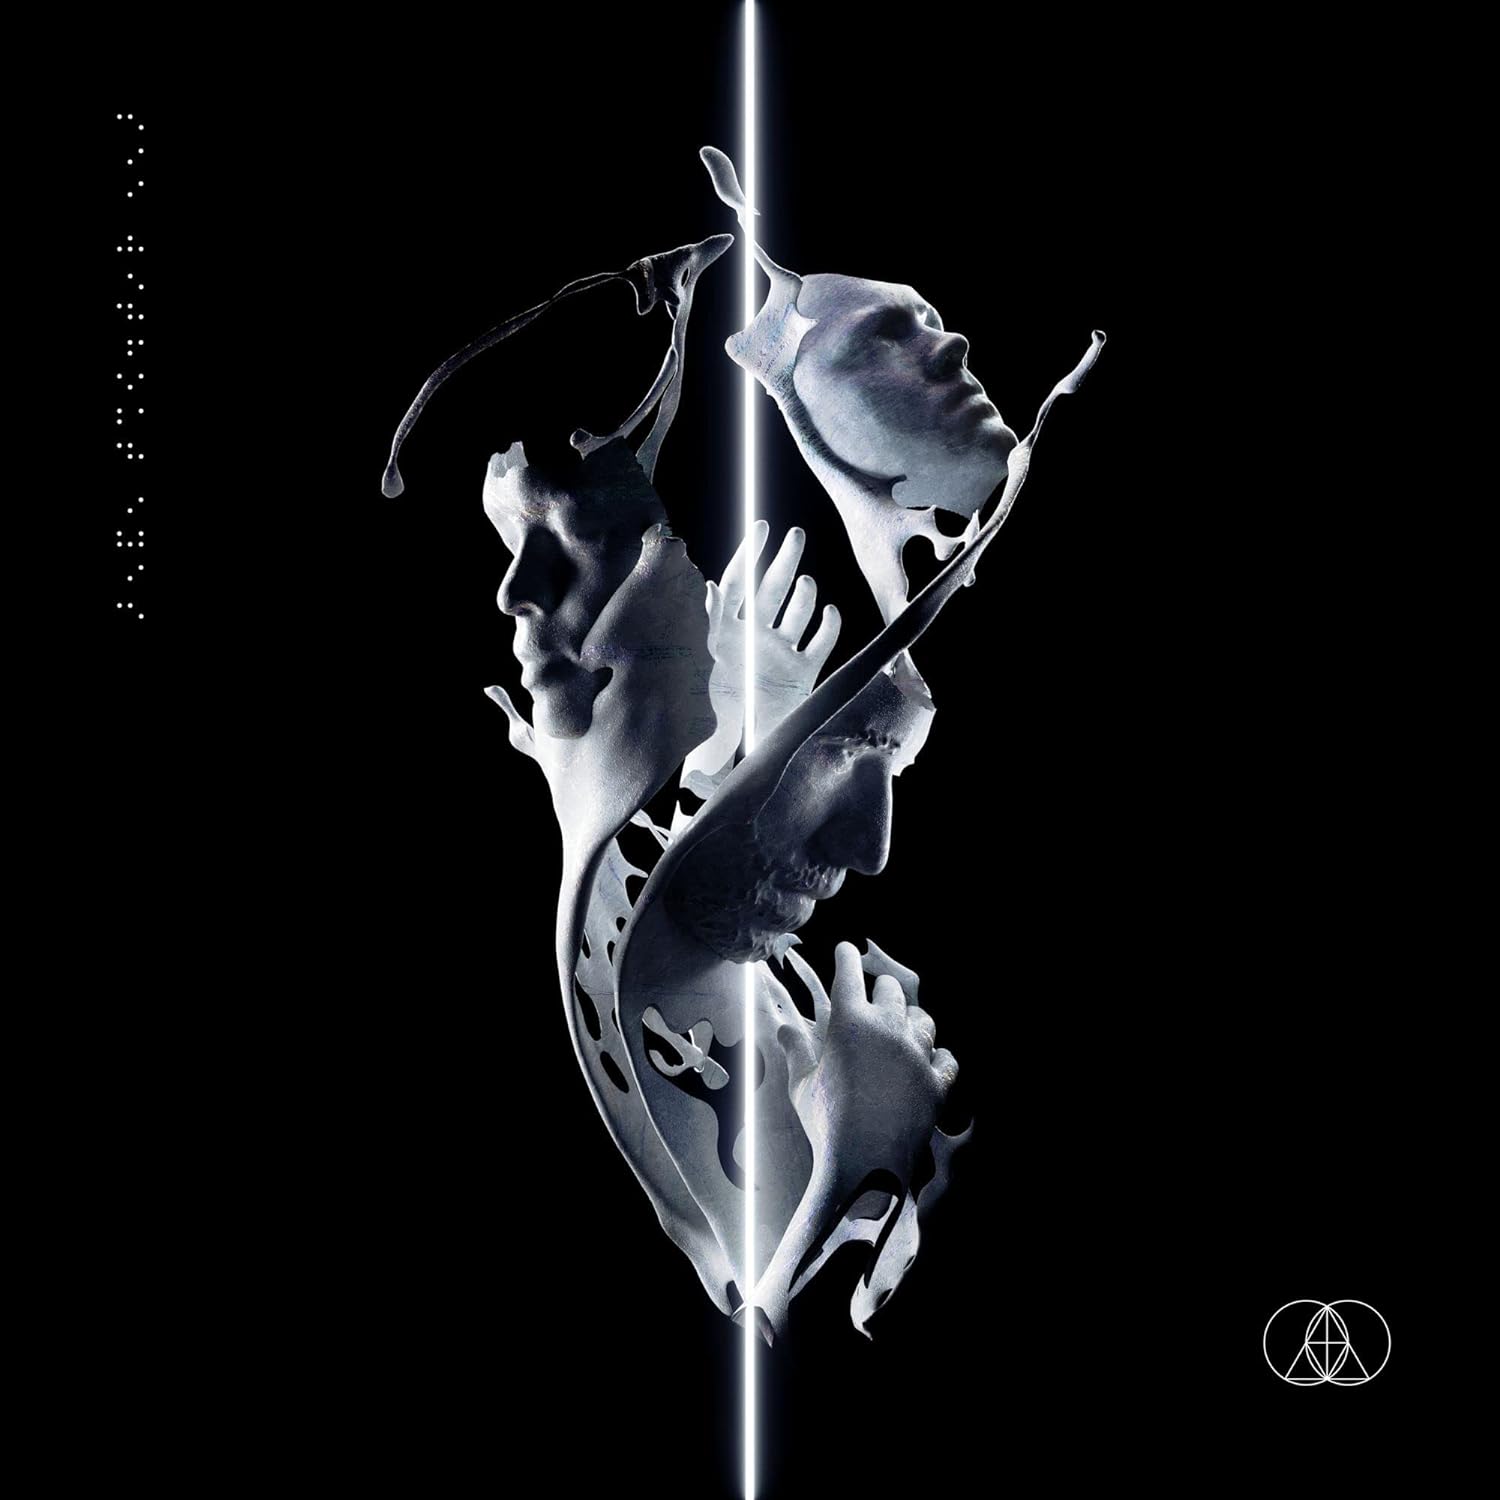 The Glitch Mob – See Without Eyes